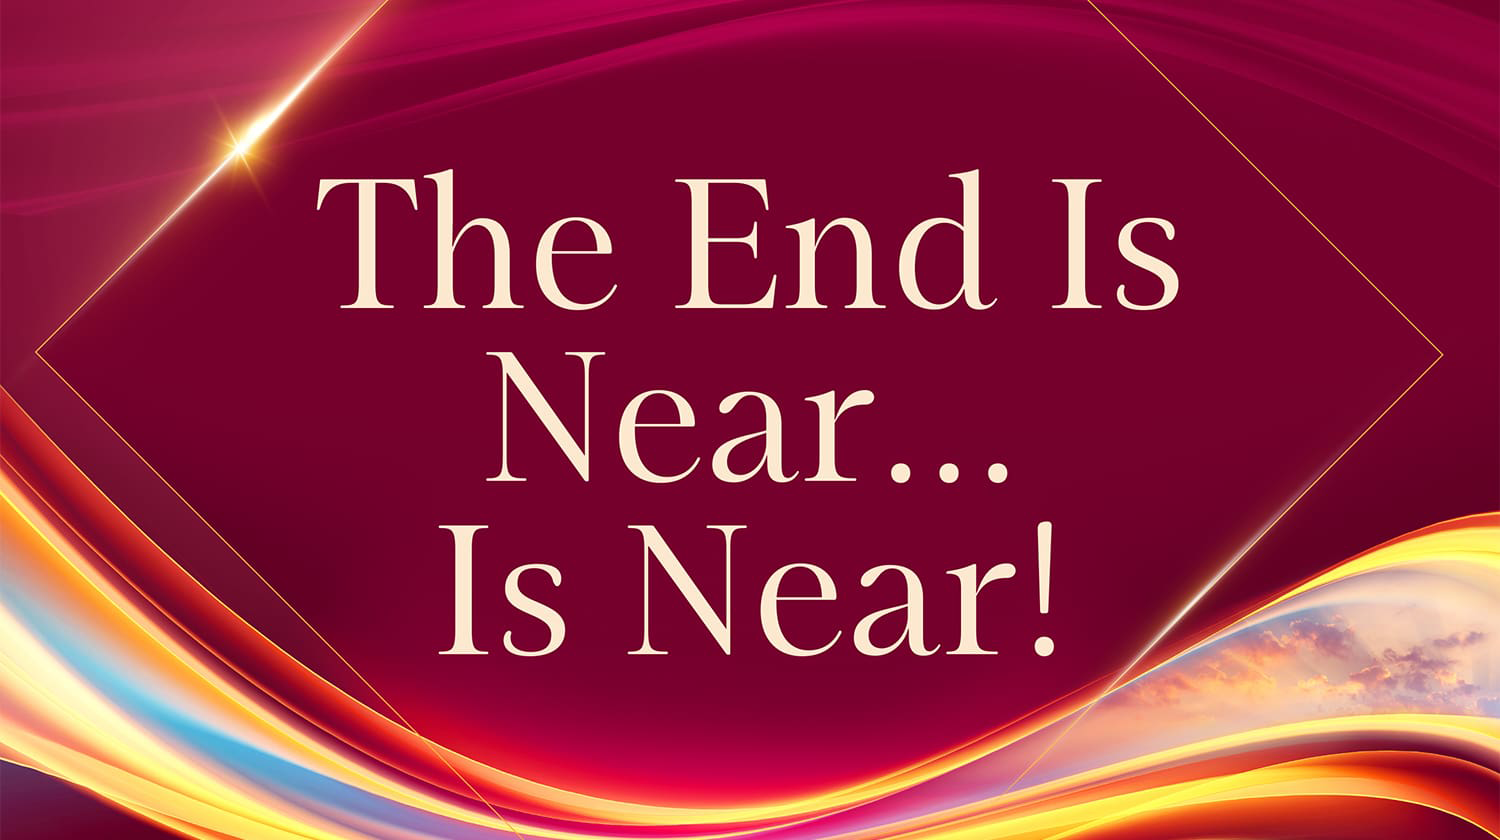 The End Is Near...Is Near! From <em>Turning Points</em> Magazine and Devotional